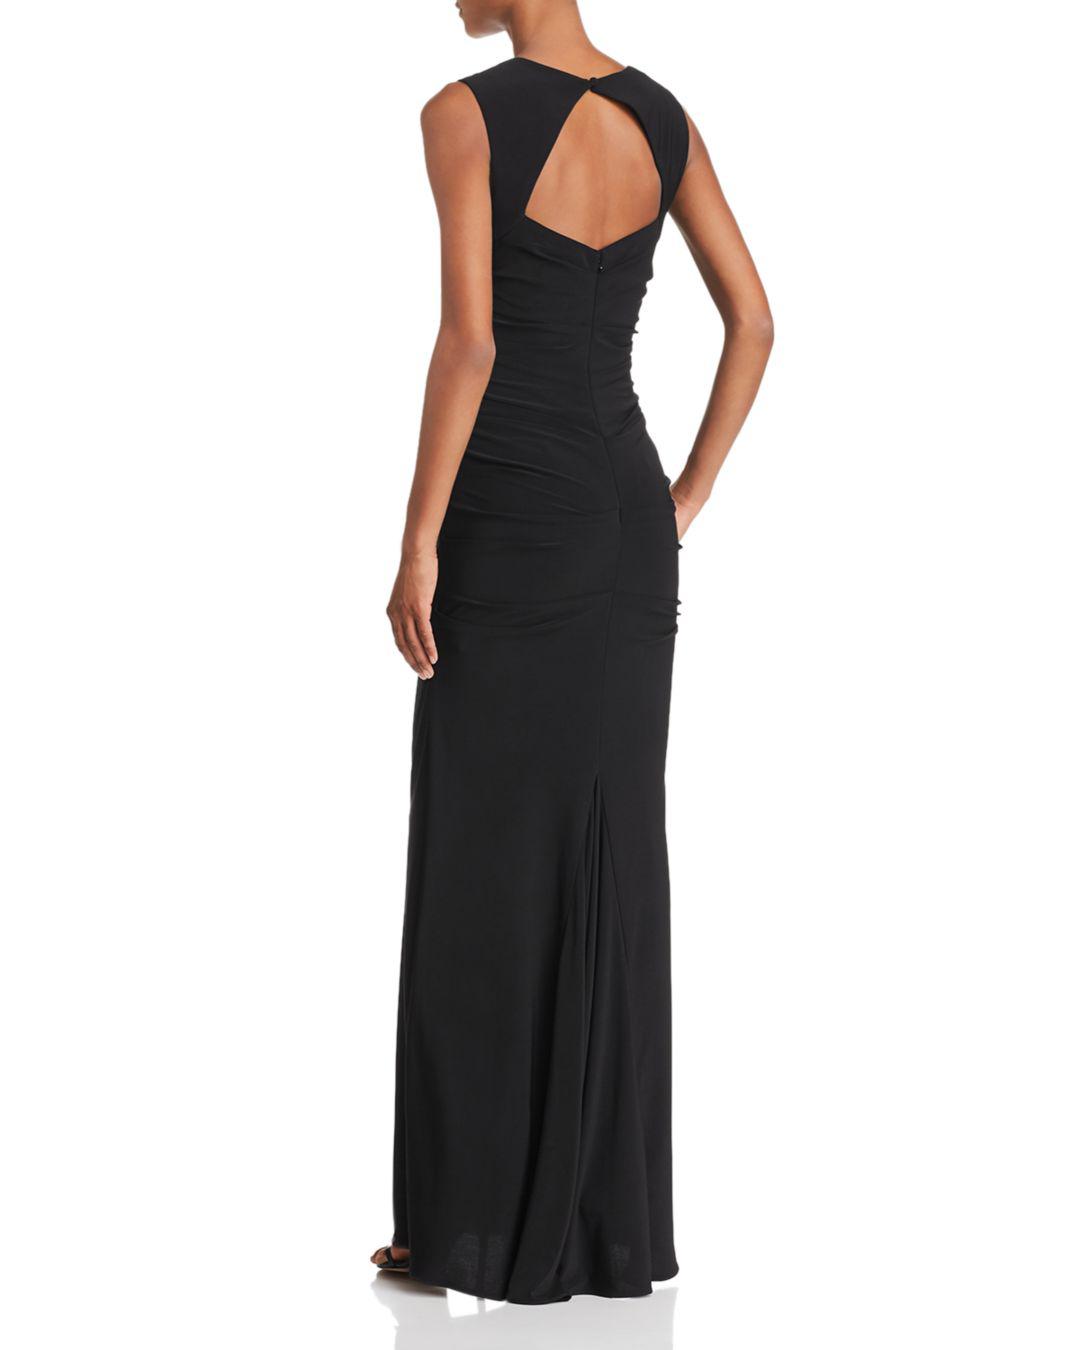 Adrianna Papell Ruched Jersey Gown in Black - Lyst